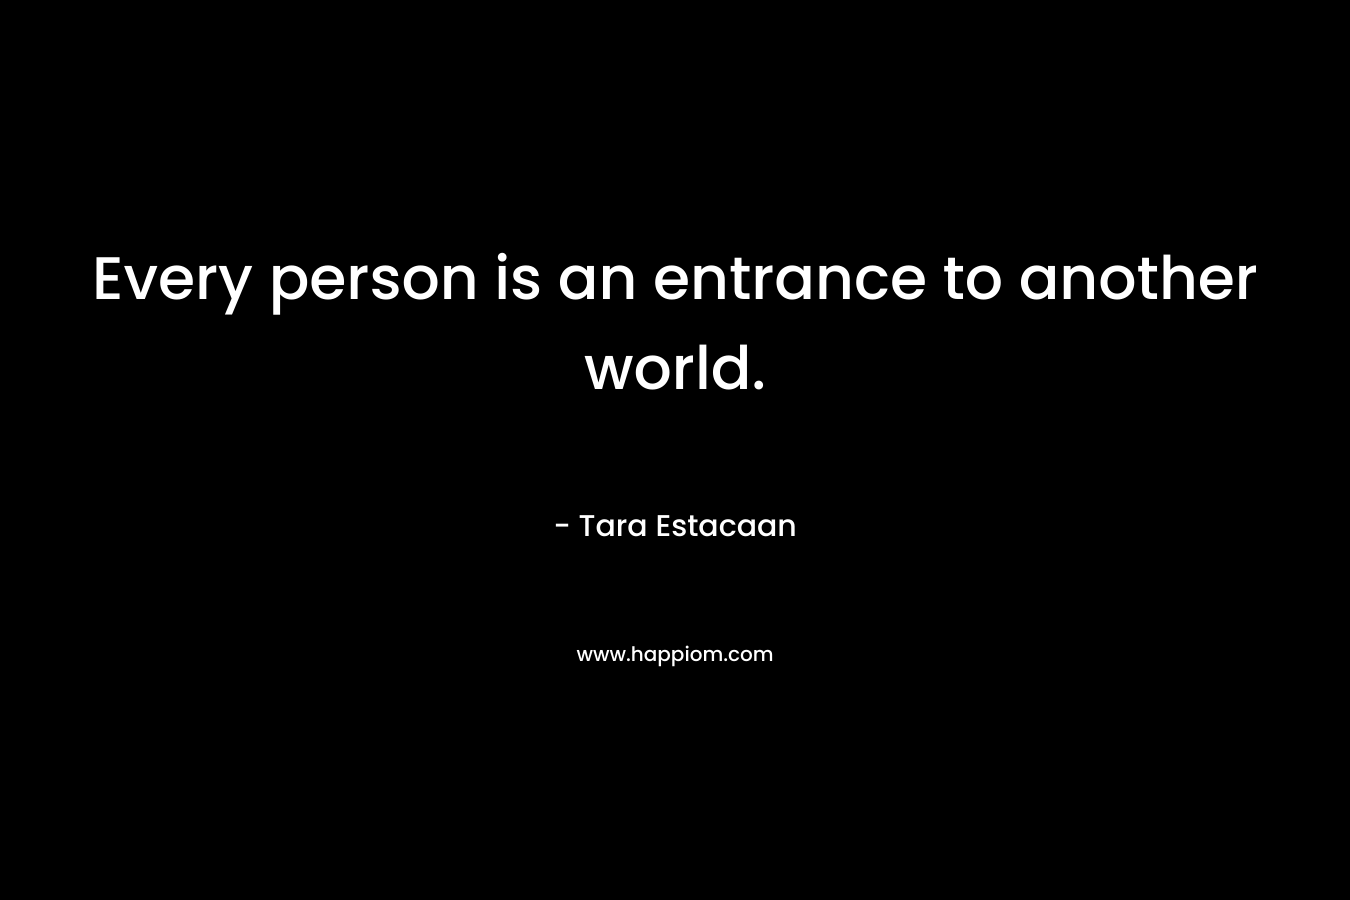 Every person is an entrance to another world.